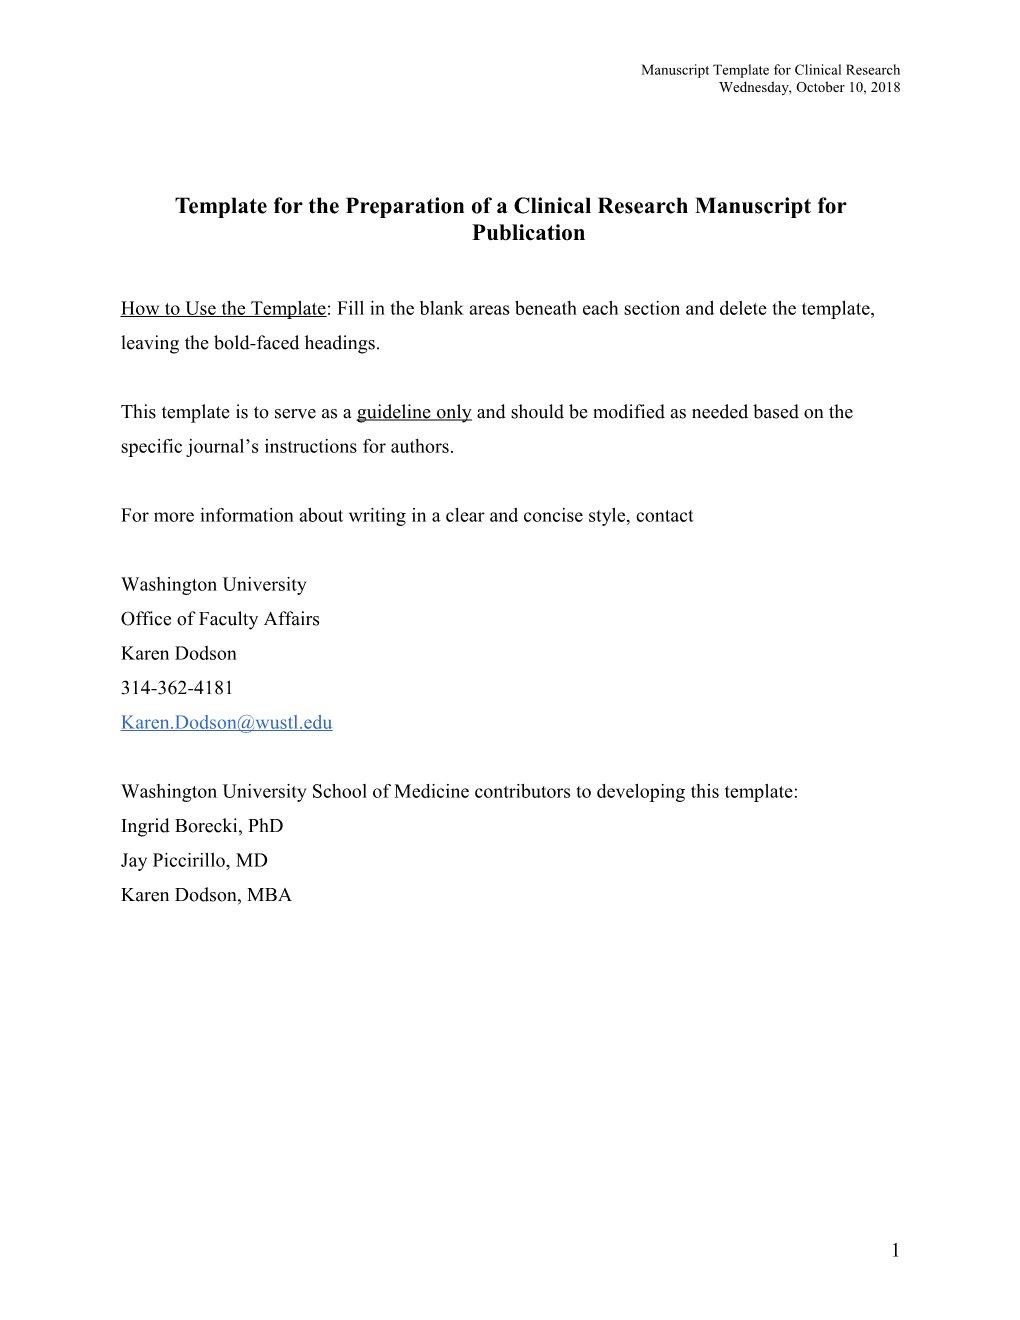 Templatefor the Preparation of a Clinical Research Manuscript for Publication